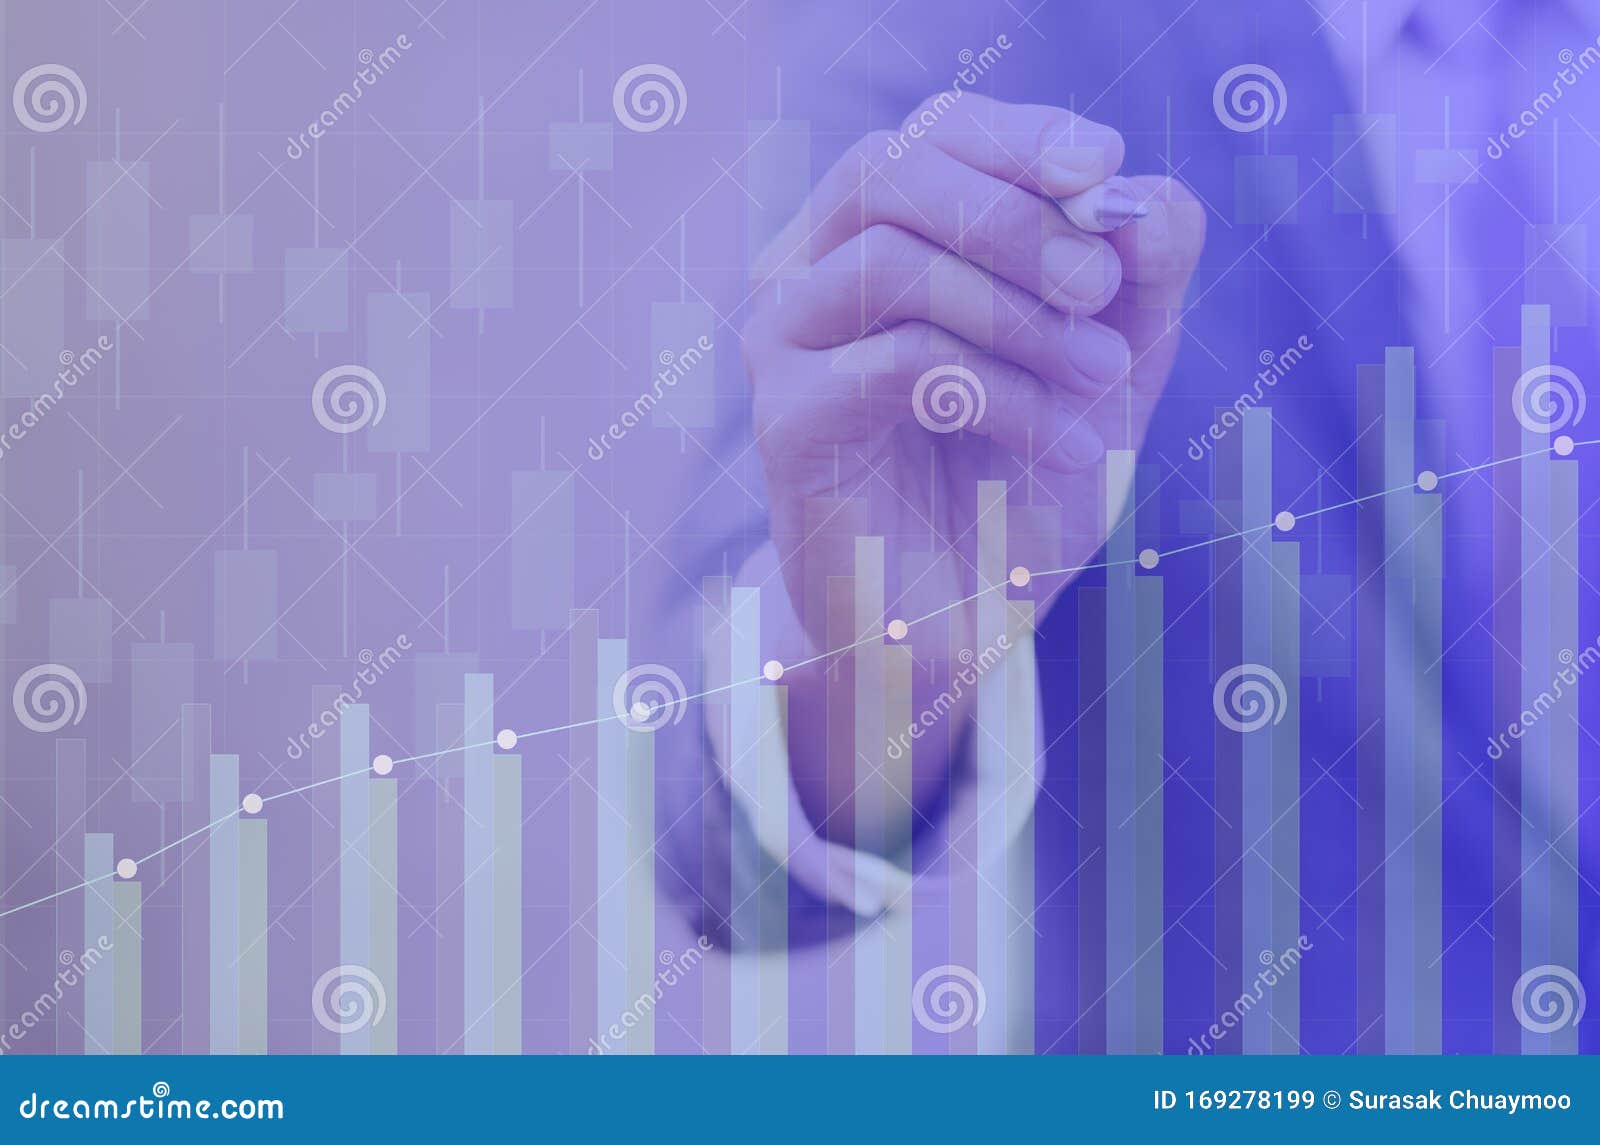 Business Finance Investment Monitoring Data Concept Stock